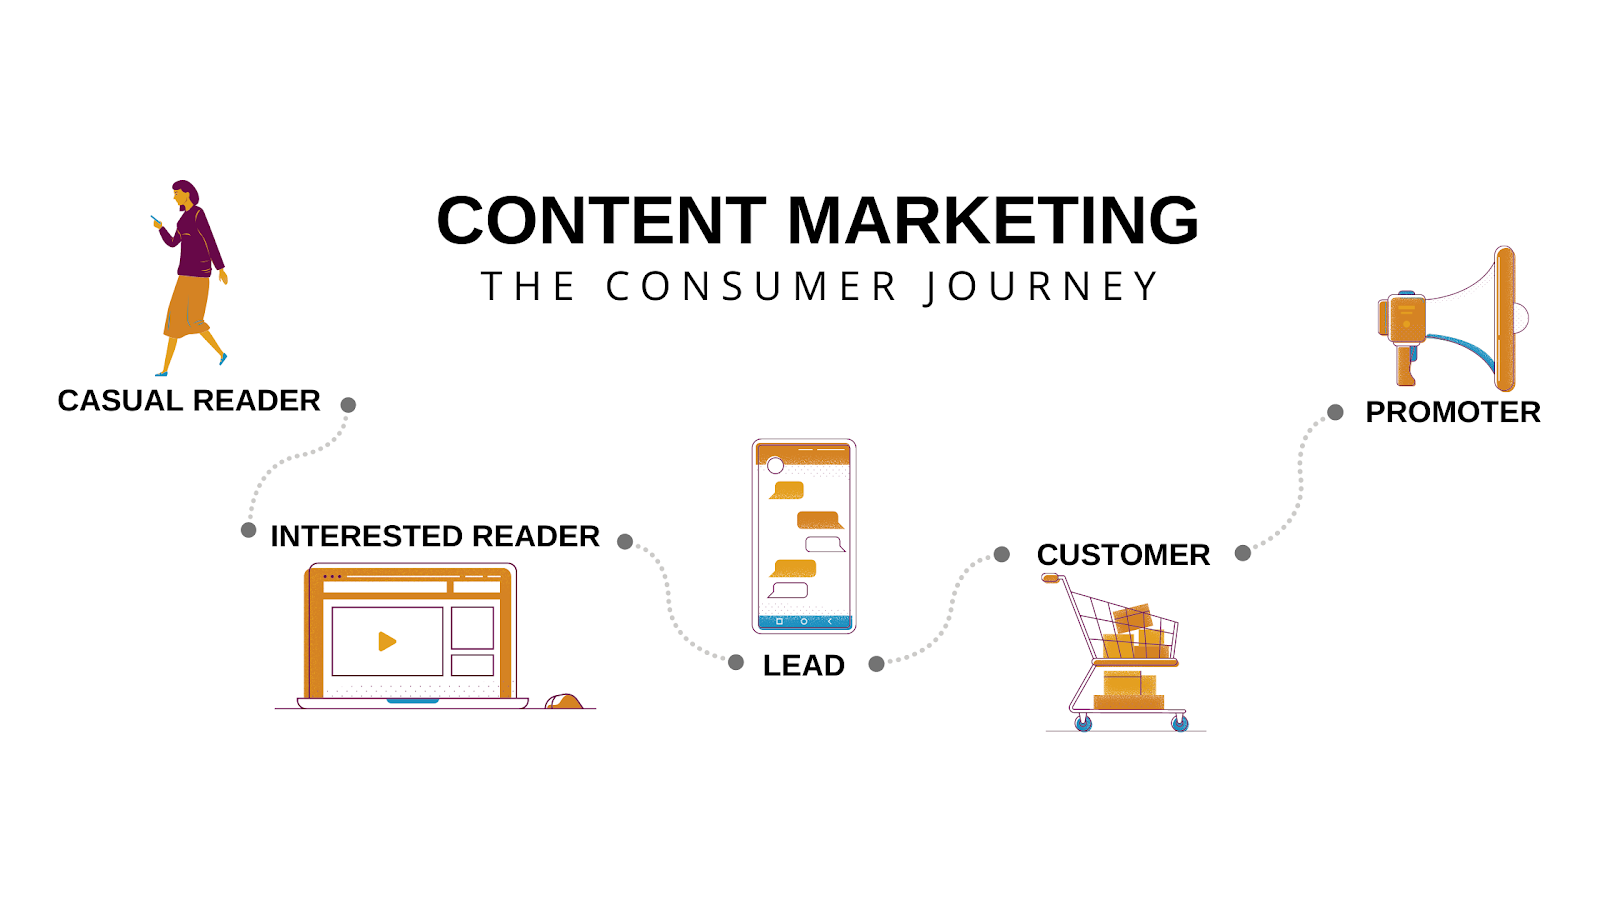 Content Marketing showing the consumer journey from casual reader to promoter